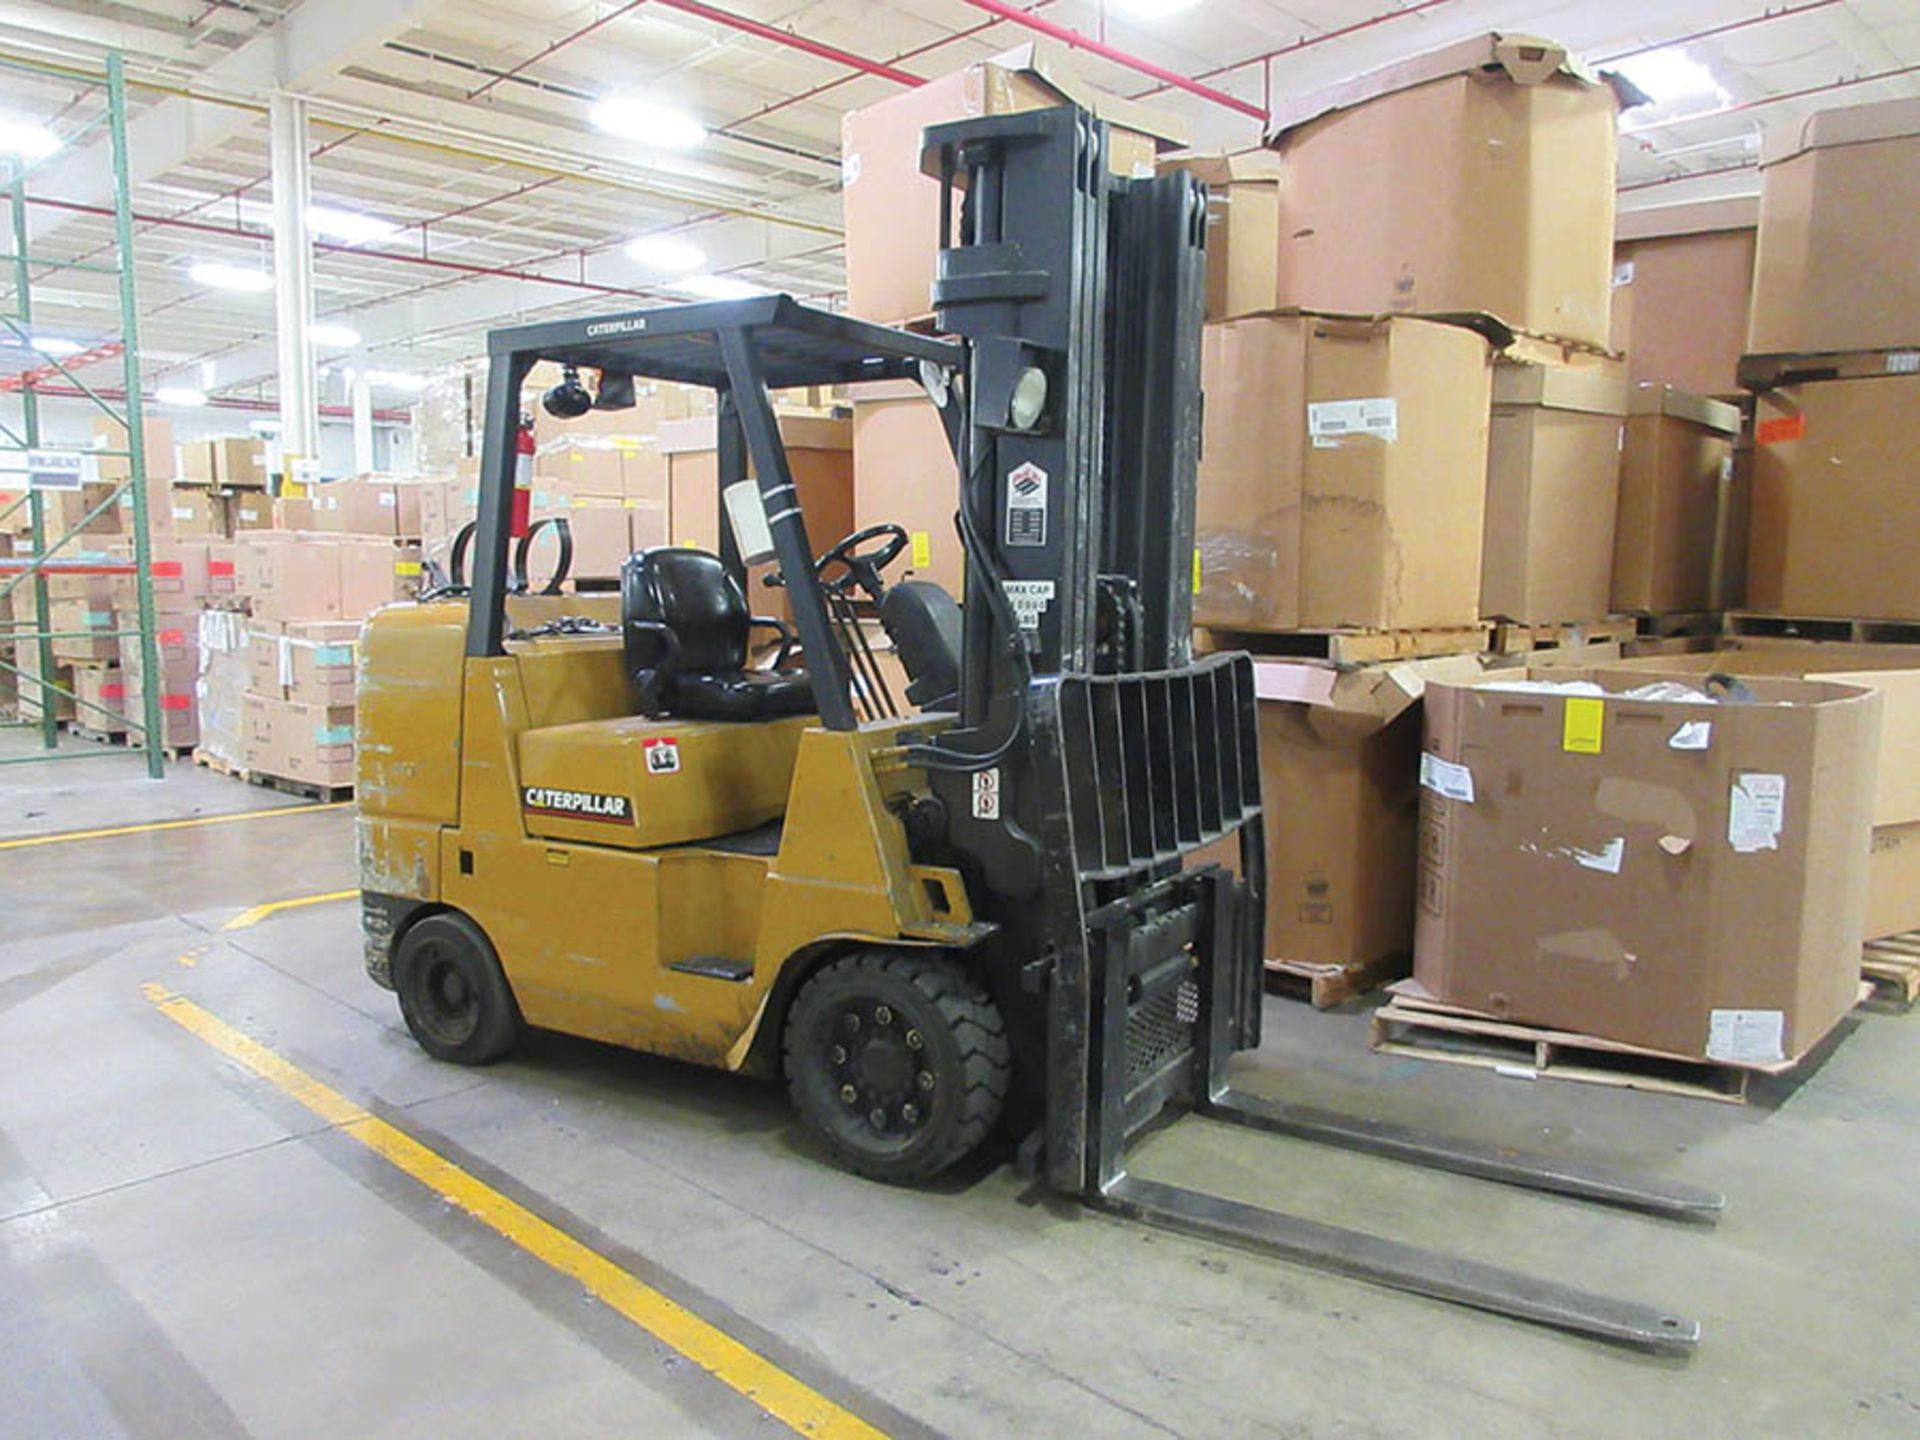 CATERPILLAR 10,000-LB. CAP. LPG FORKLIFT, 3-STAGE MAST, SIDE SHIFT, 209'' MAX LOAD HEIGHT, LEVER